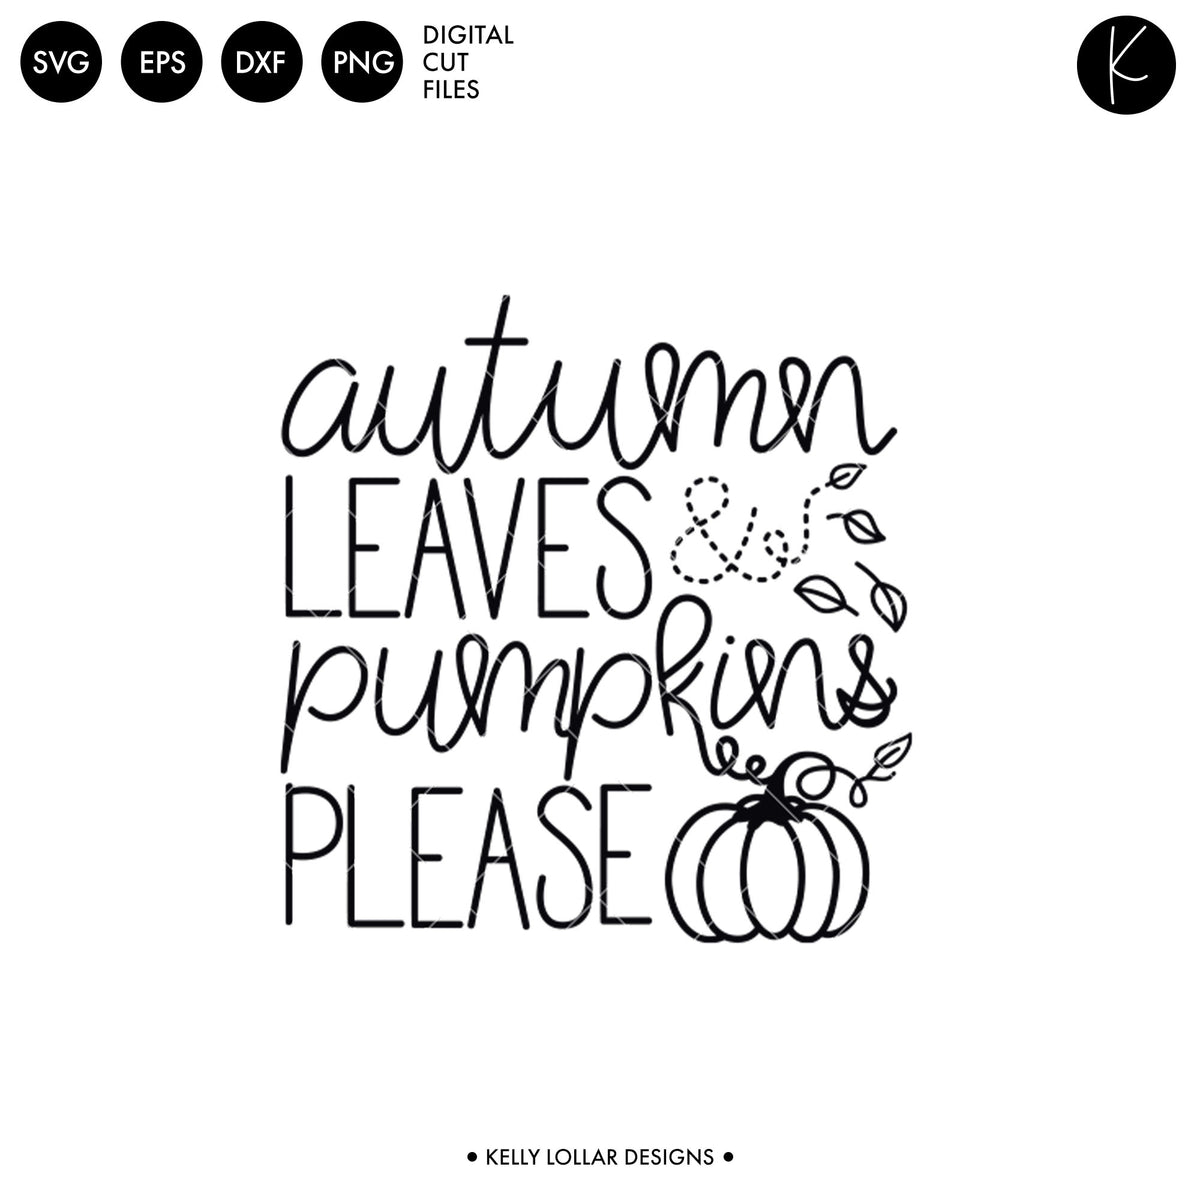 Autumn Leaves and Pumpkins Please | SVG DXF EPS PNG Cut Files